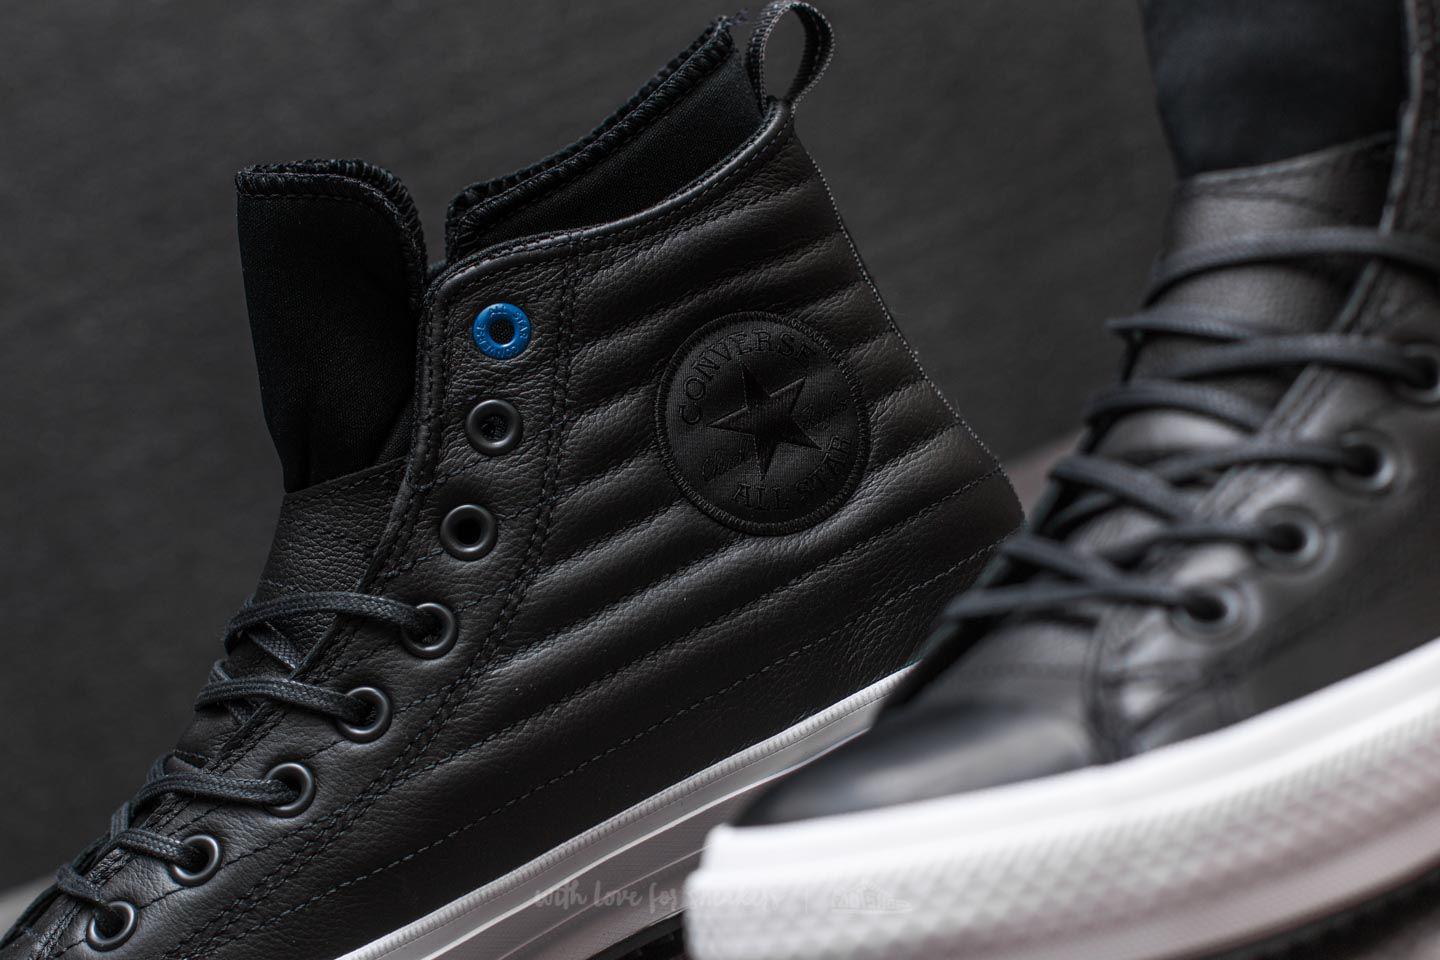 converse chuck taylor waterproof boot hi quilted leather